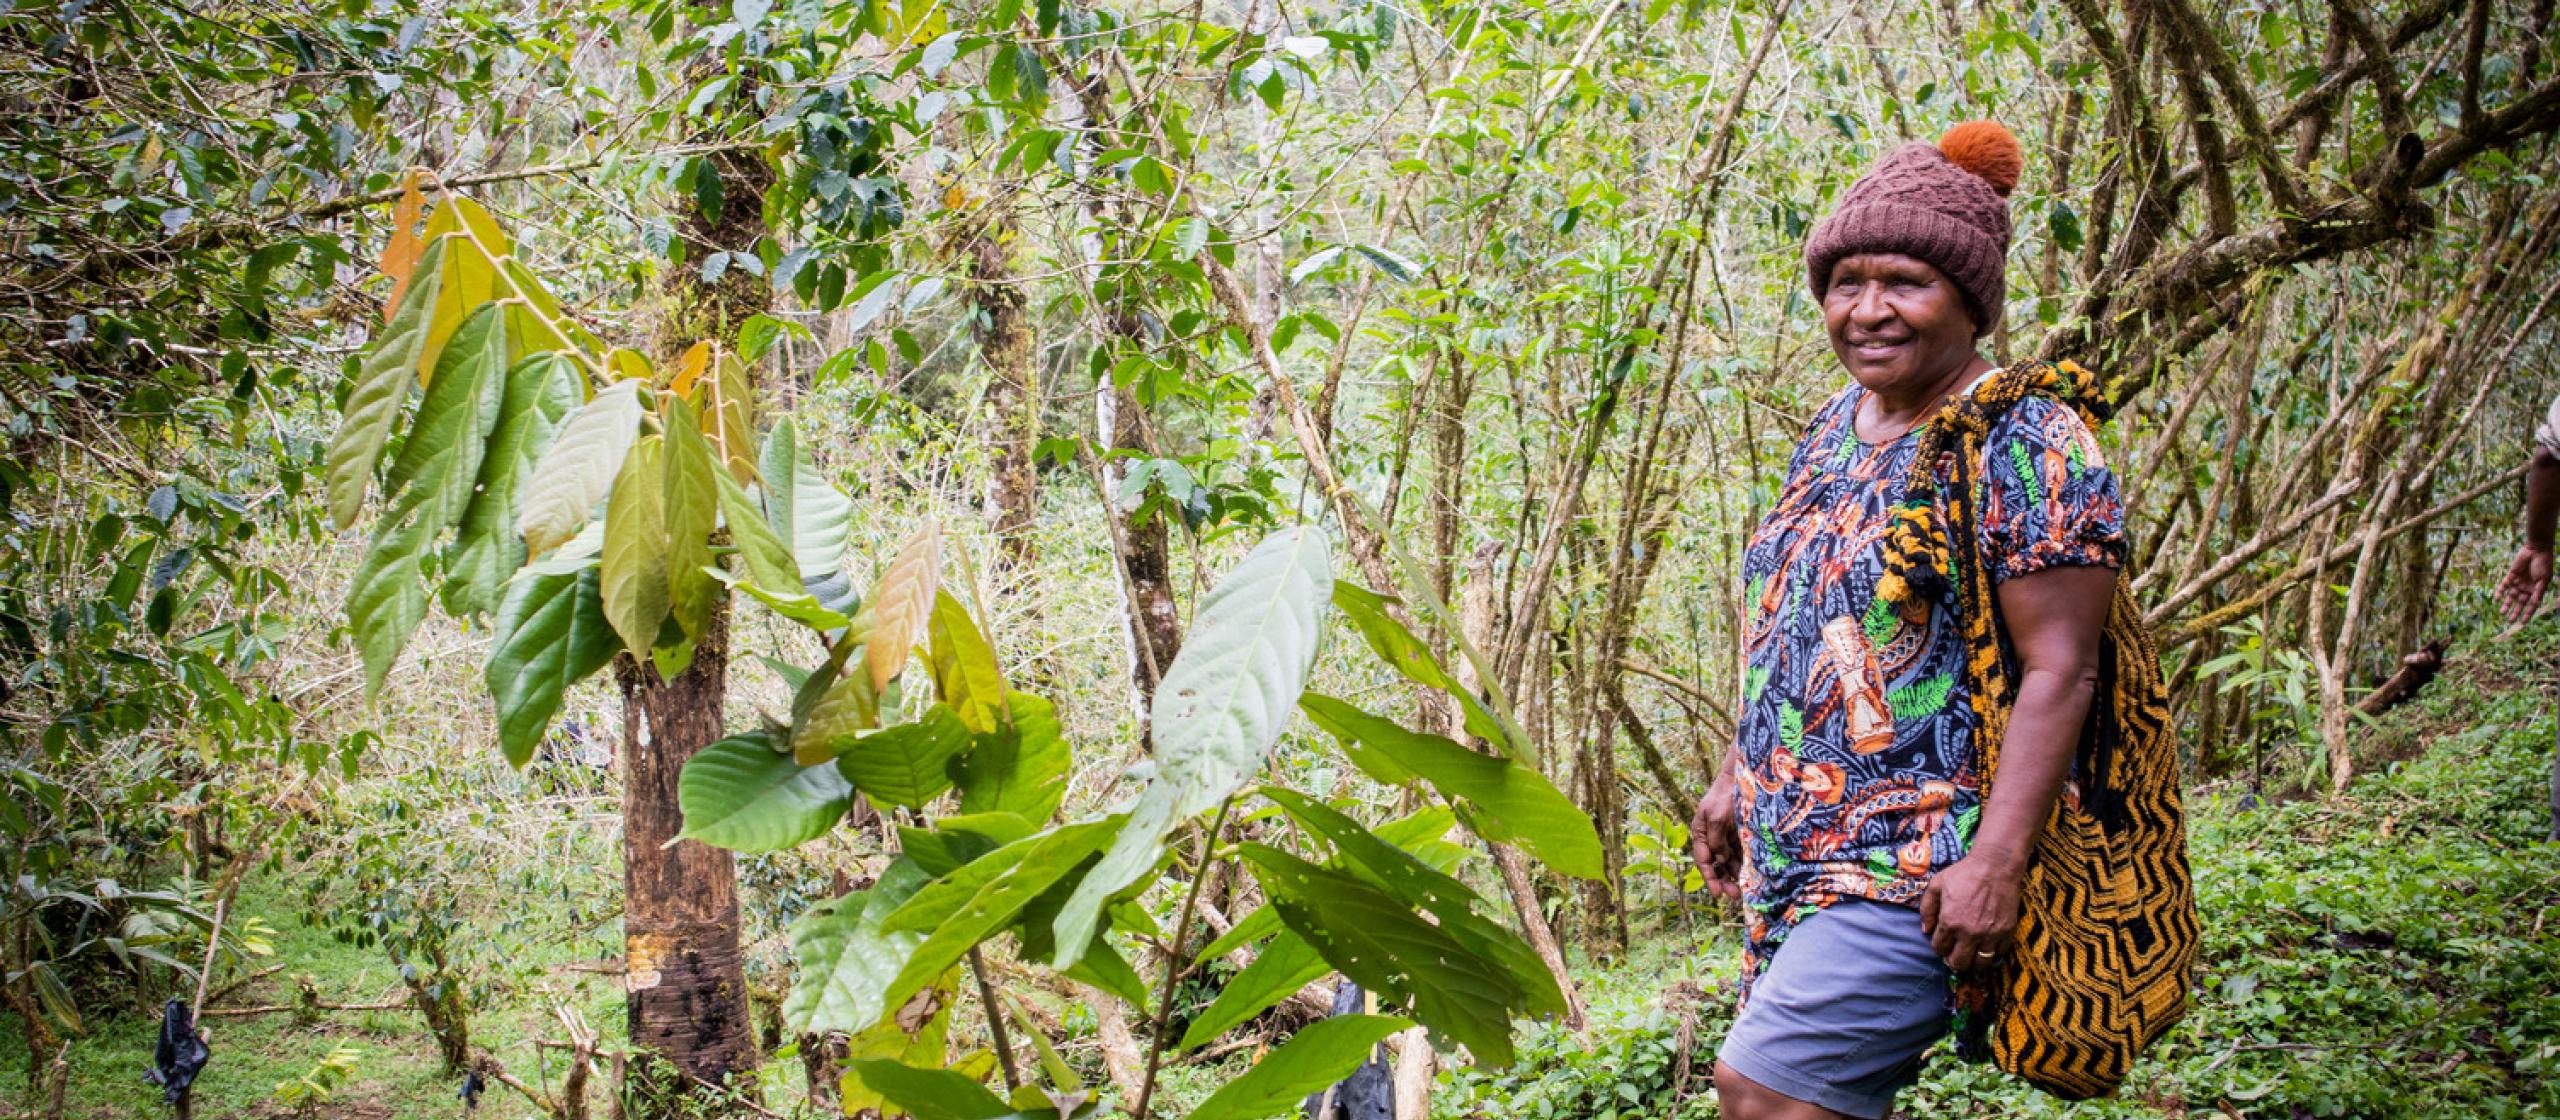 Mrs Aba Wei in her cocoa garden in Gumine district, Chimbu Province. With the introduction of cocoa into parts of the Highlands, local farmers are keen to take up the crop that has primarily been grown in coastal provinces.